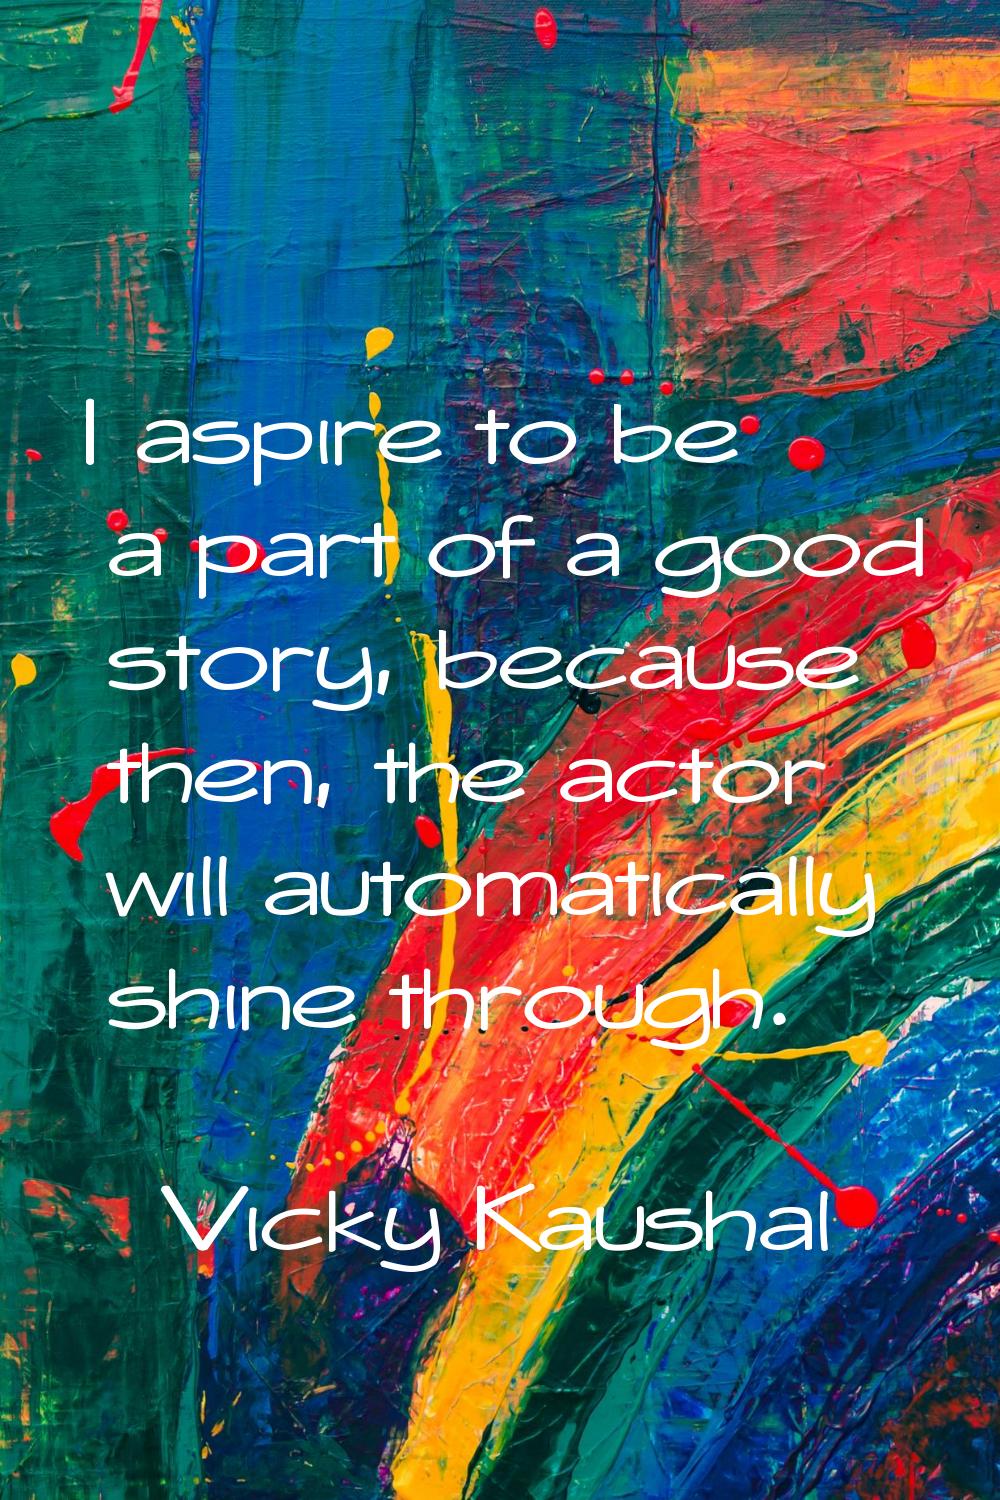 I aspire to be a part of a good story, because then, the actor will automatically shine through.